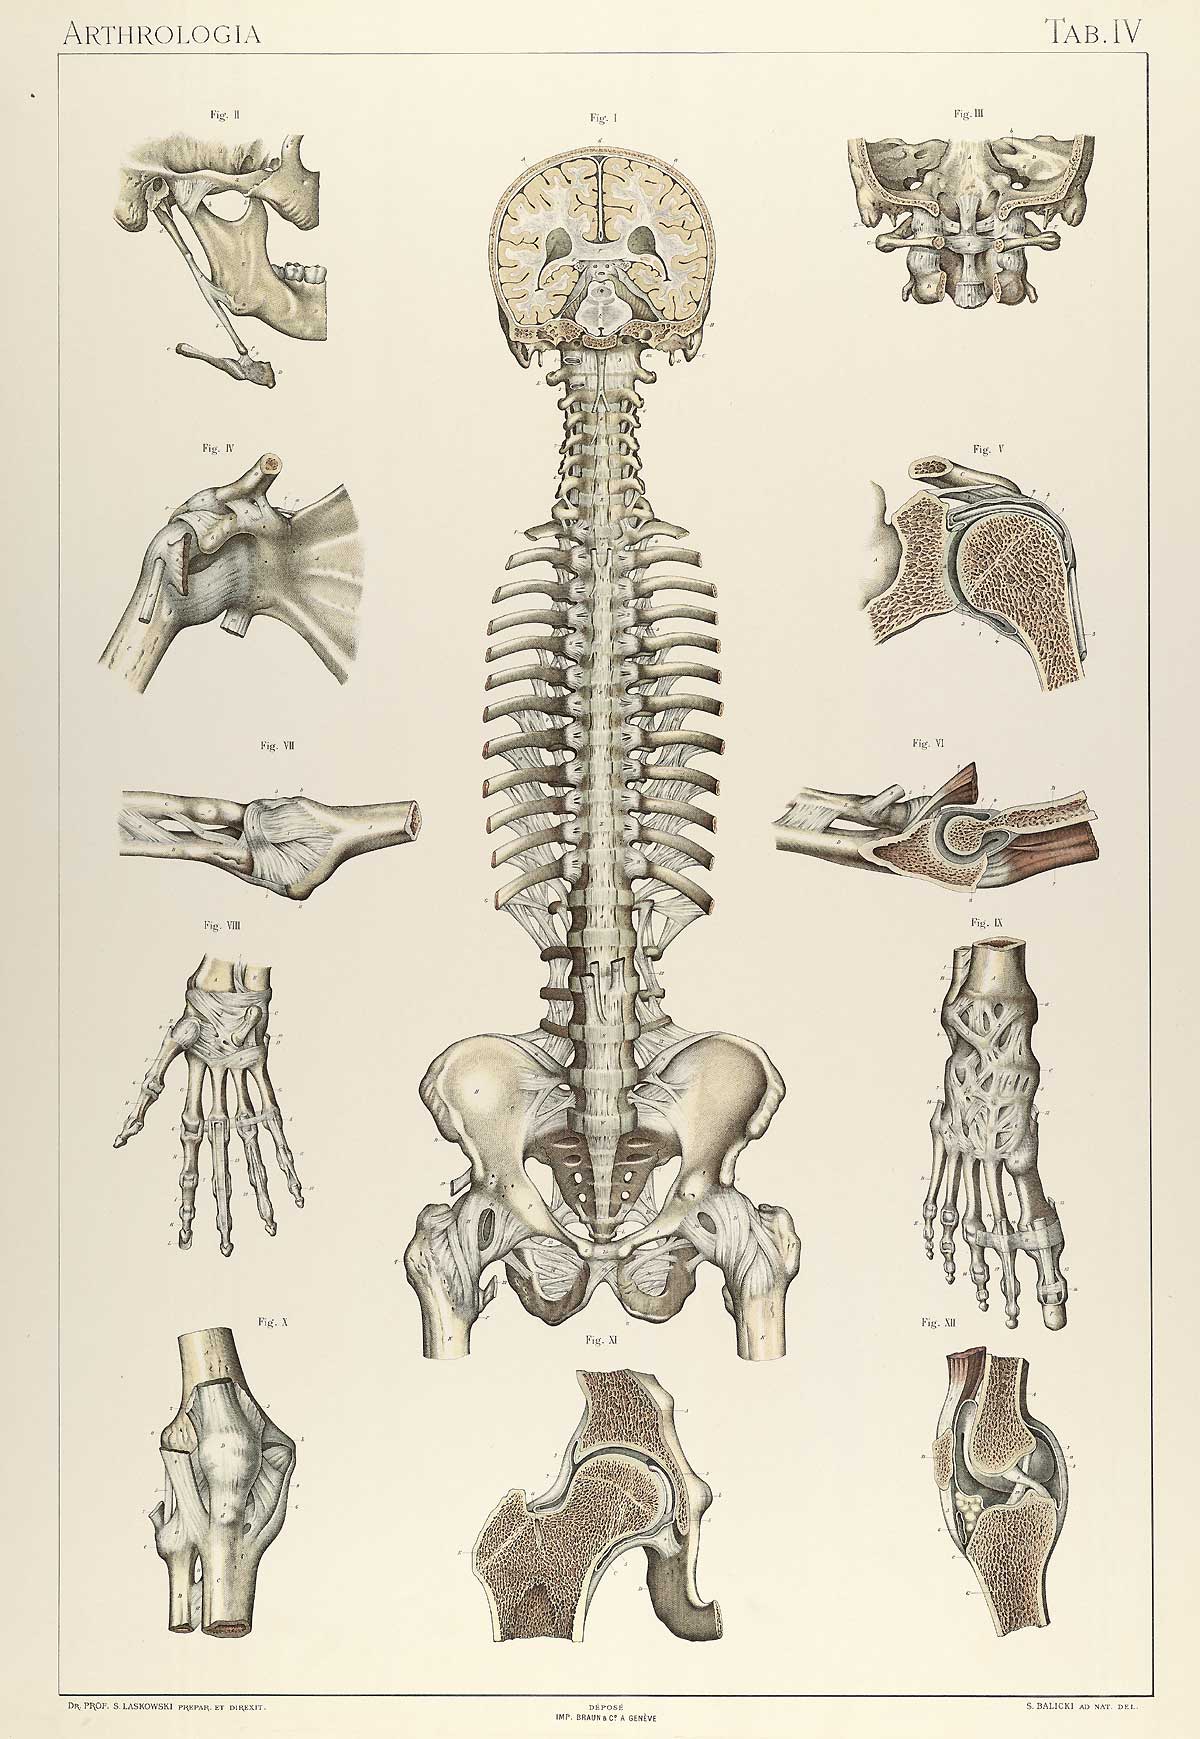 Plate 4 of Sigismond Laskowski's Anatomie normale du corps humain, featuring illustrations of the joints through out the body.